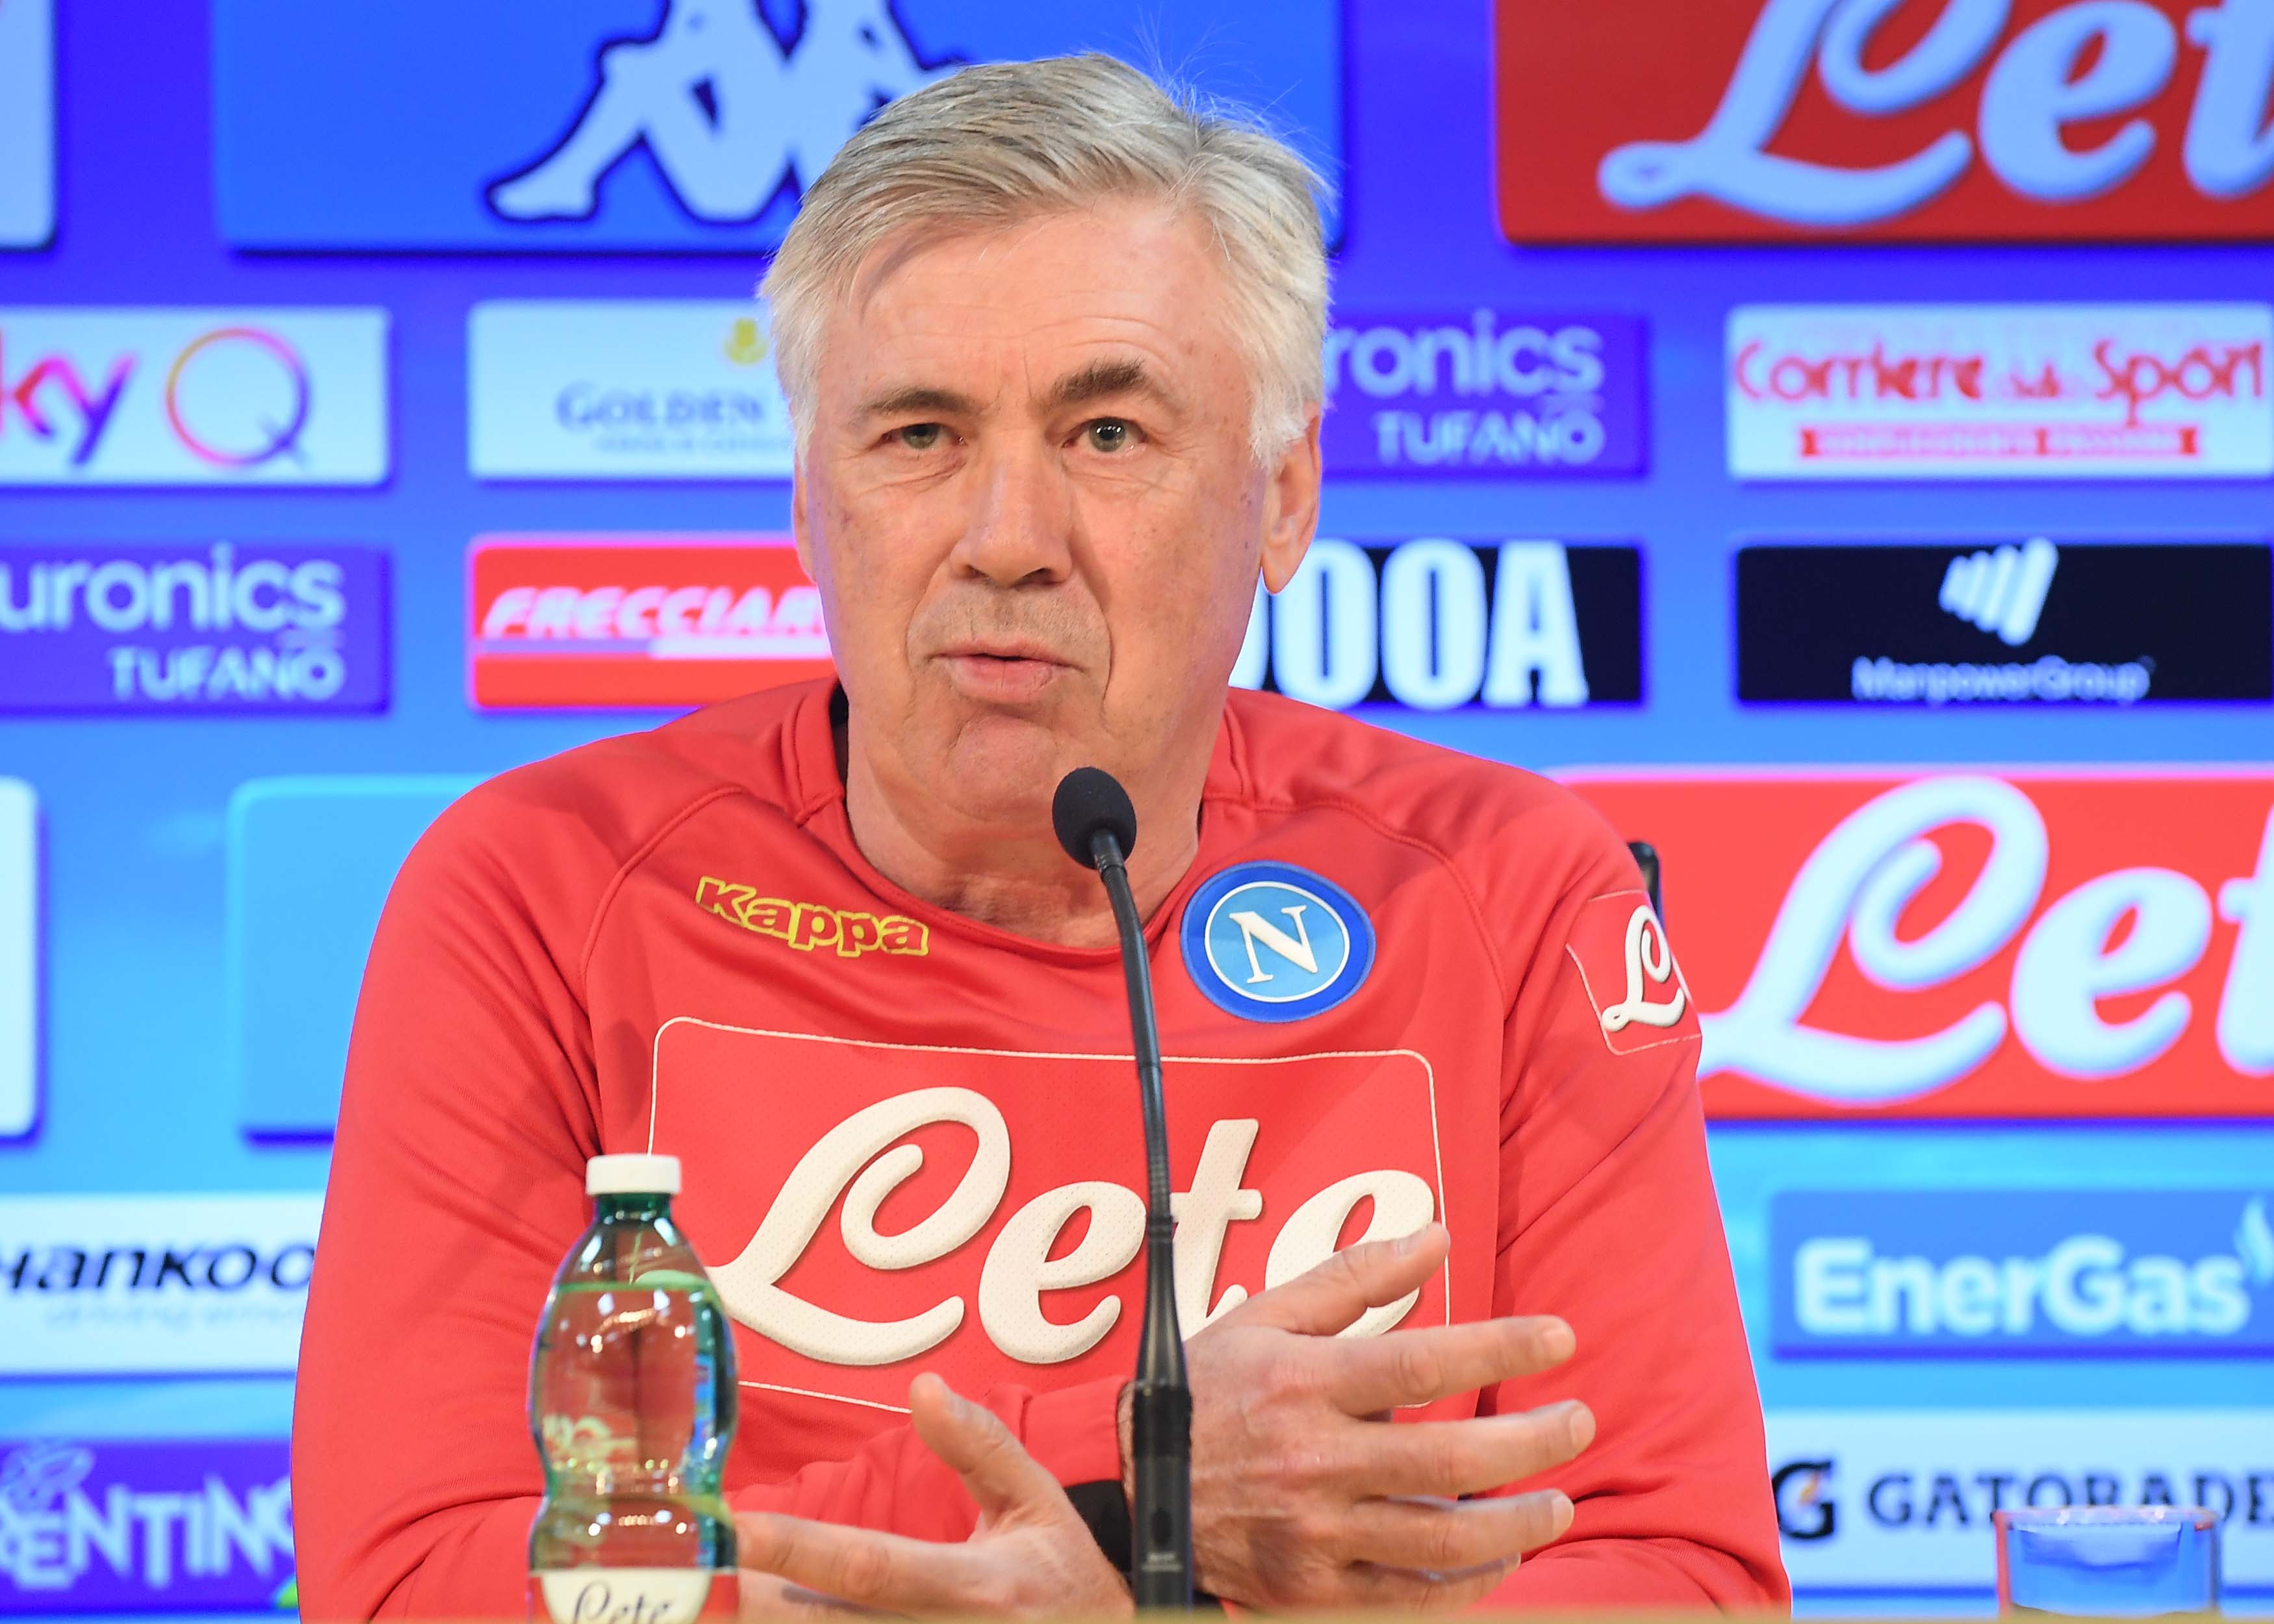 NAPLES, ITALY - MARCH 30:  Carlo Ancelotti during an SSC Napoli Press Conference on March 30, 2019 in Naples, Italy.  (Photo by Ciro Sarpa SSC NAPOLI/SSC NAPOLI via Getty Images)